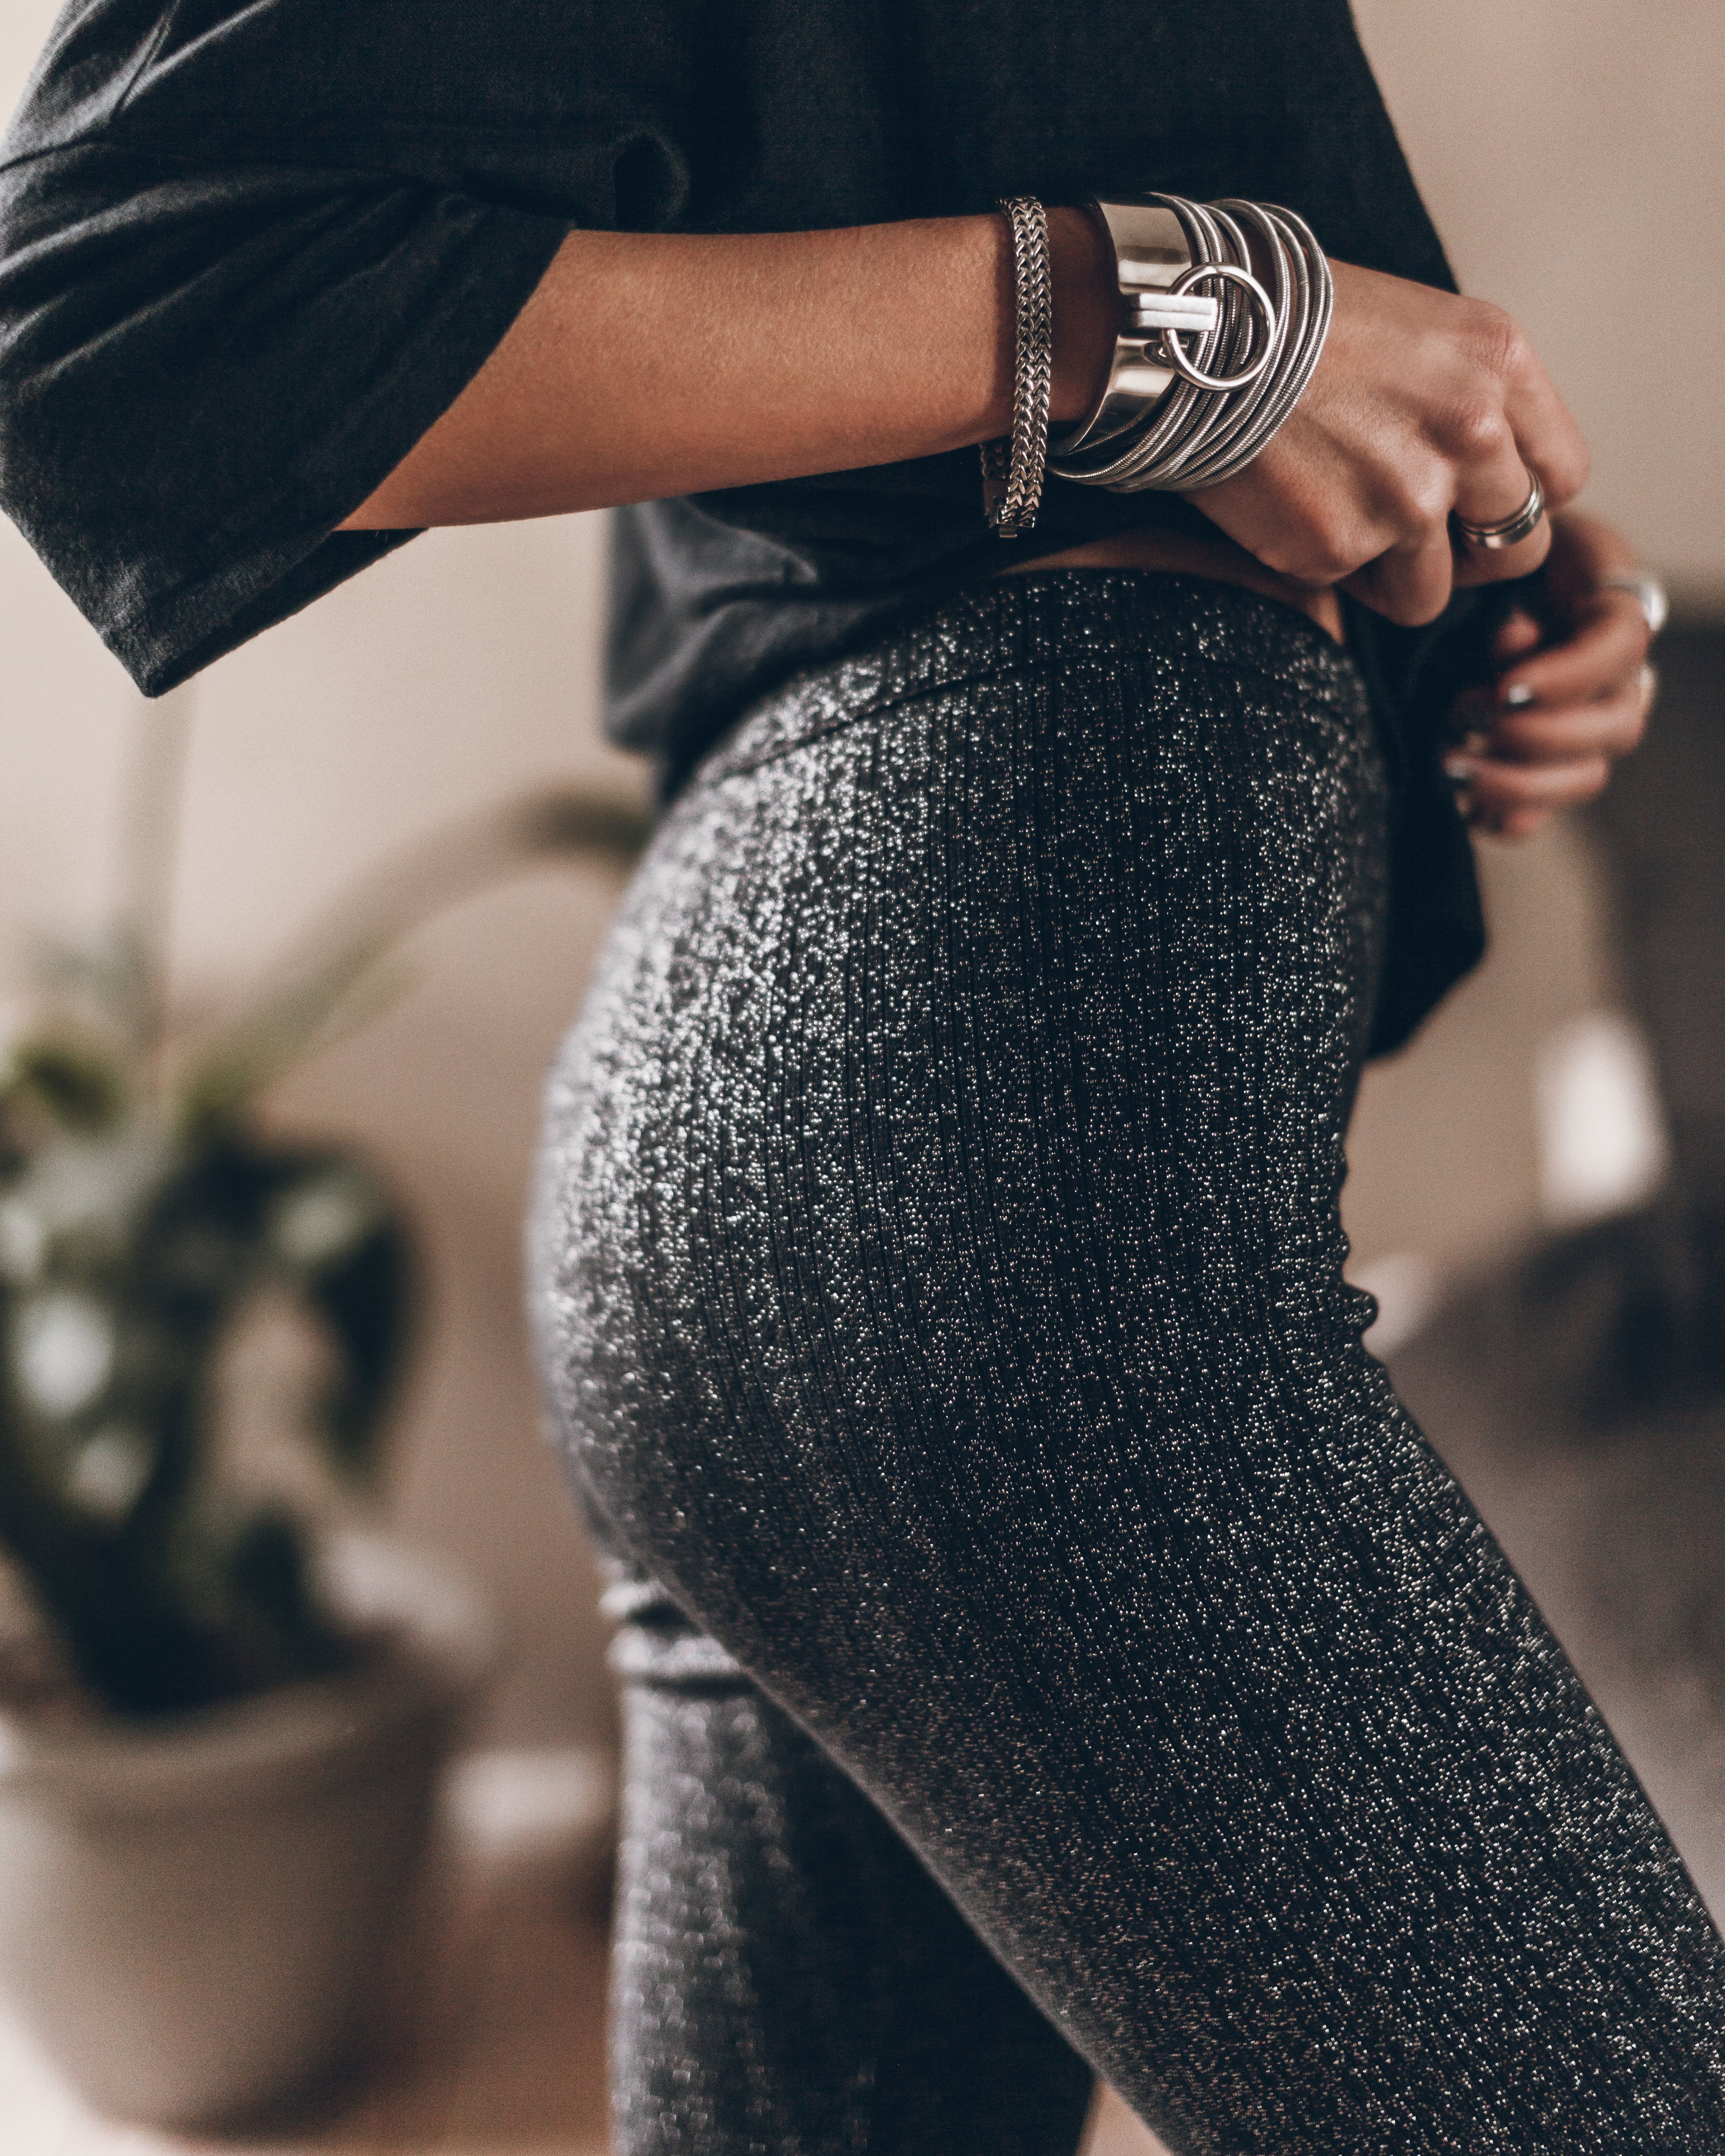 The Sparkly Ribbed Leggings